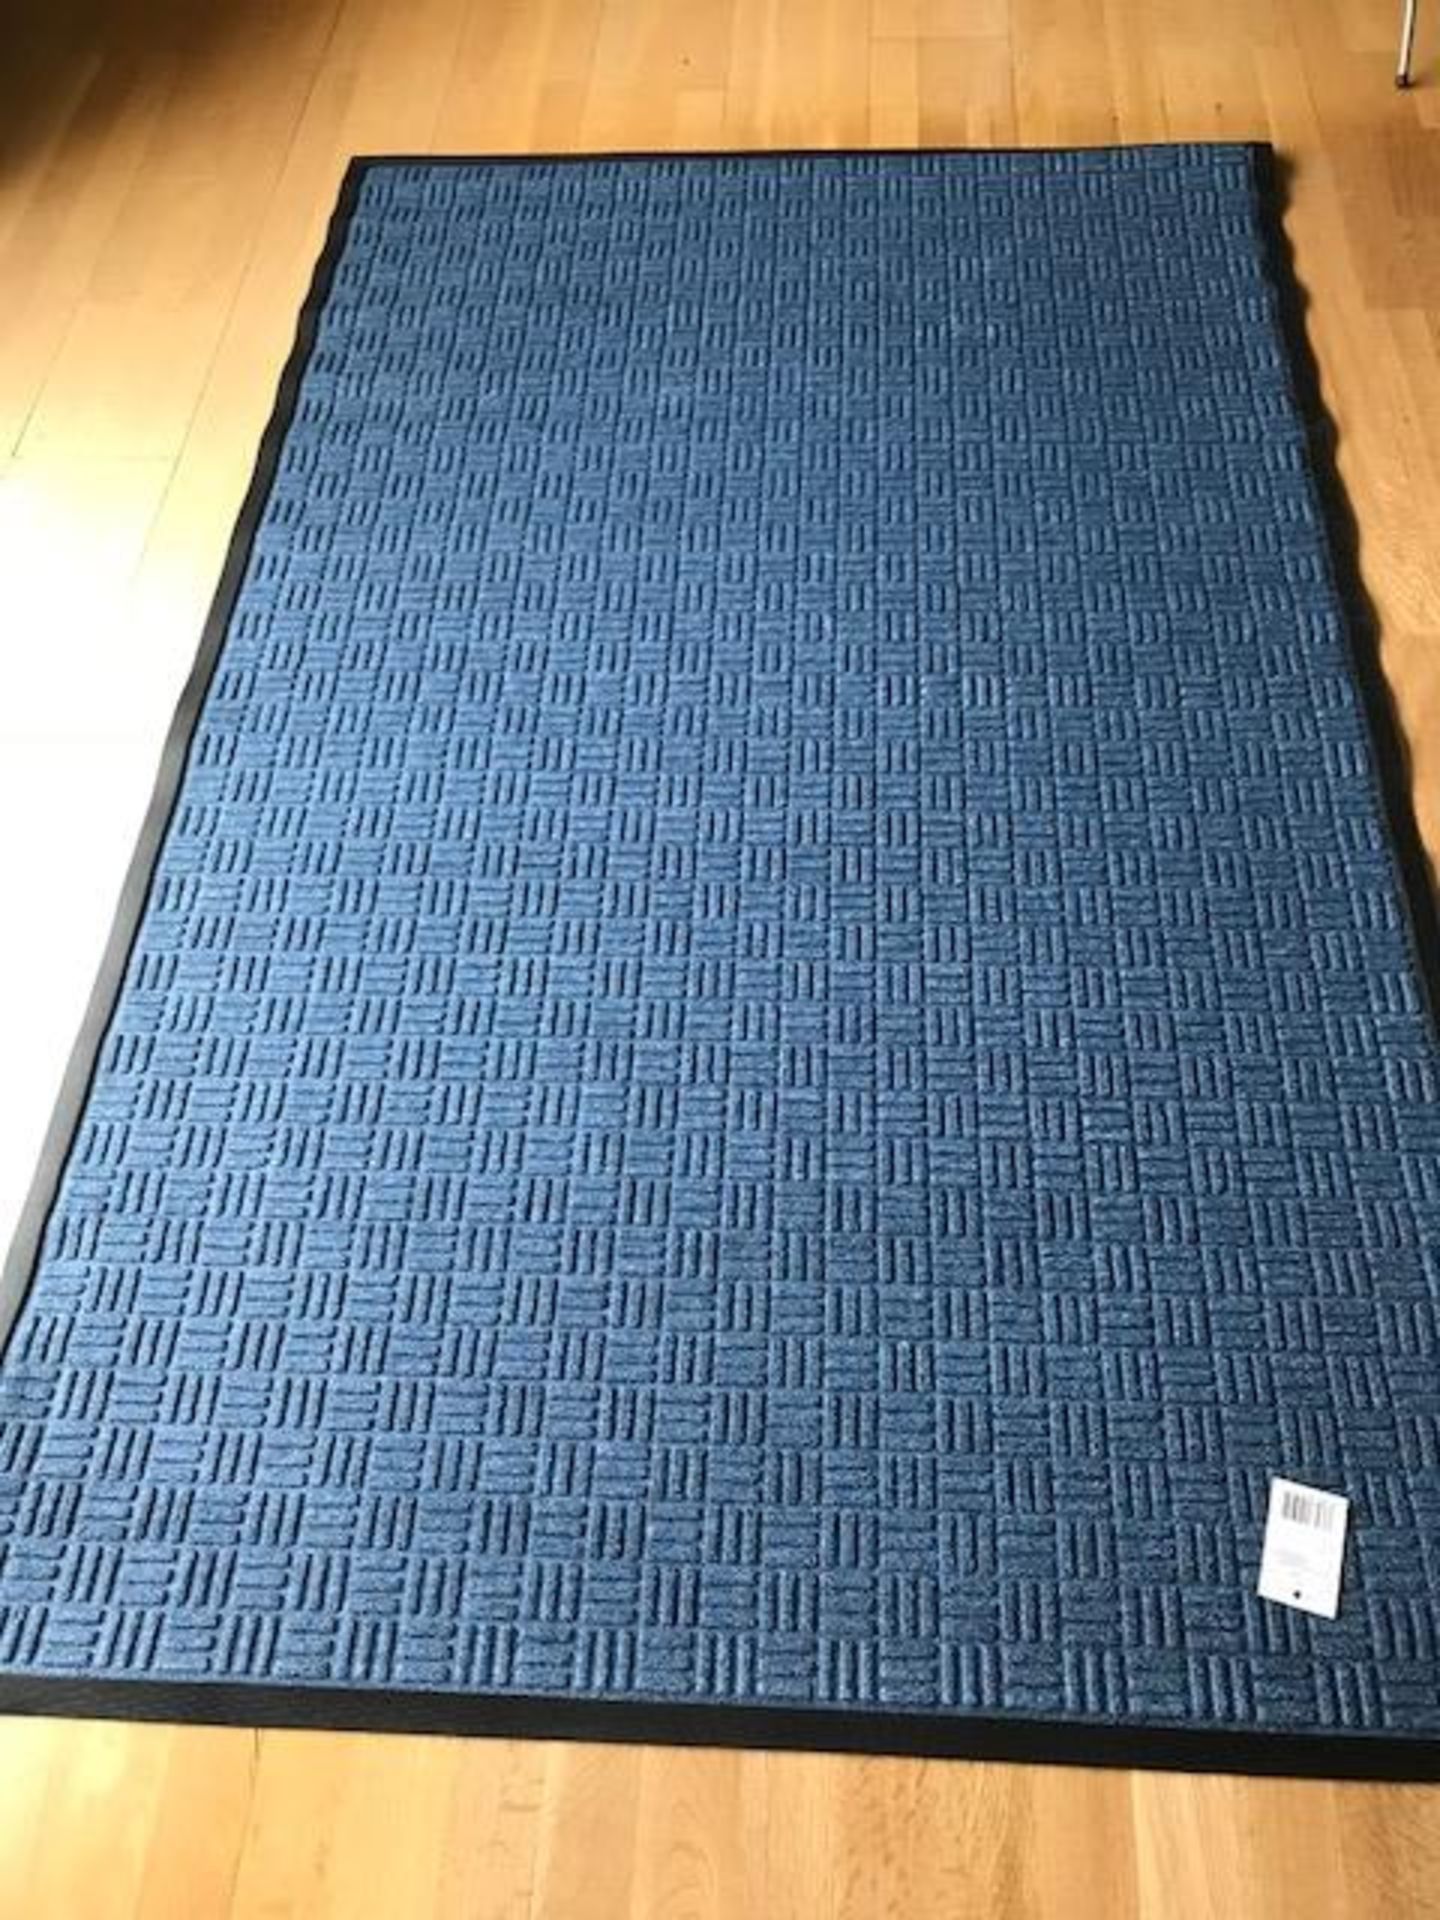 V Brand New Heavy Duty Grey Entrance Mat - Also For Residential Use - Approx 6ft X 4ft - Non Slip